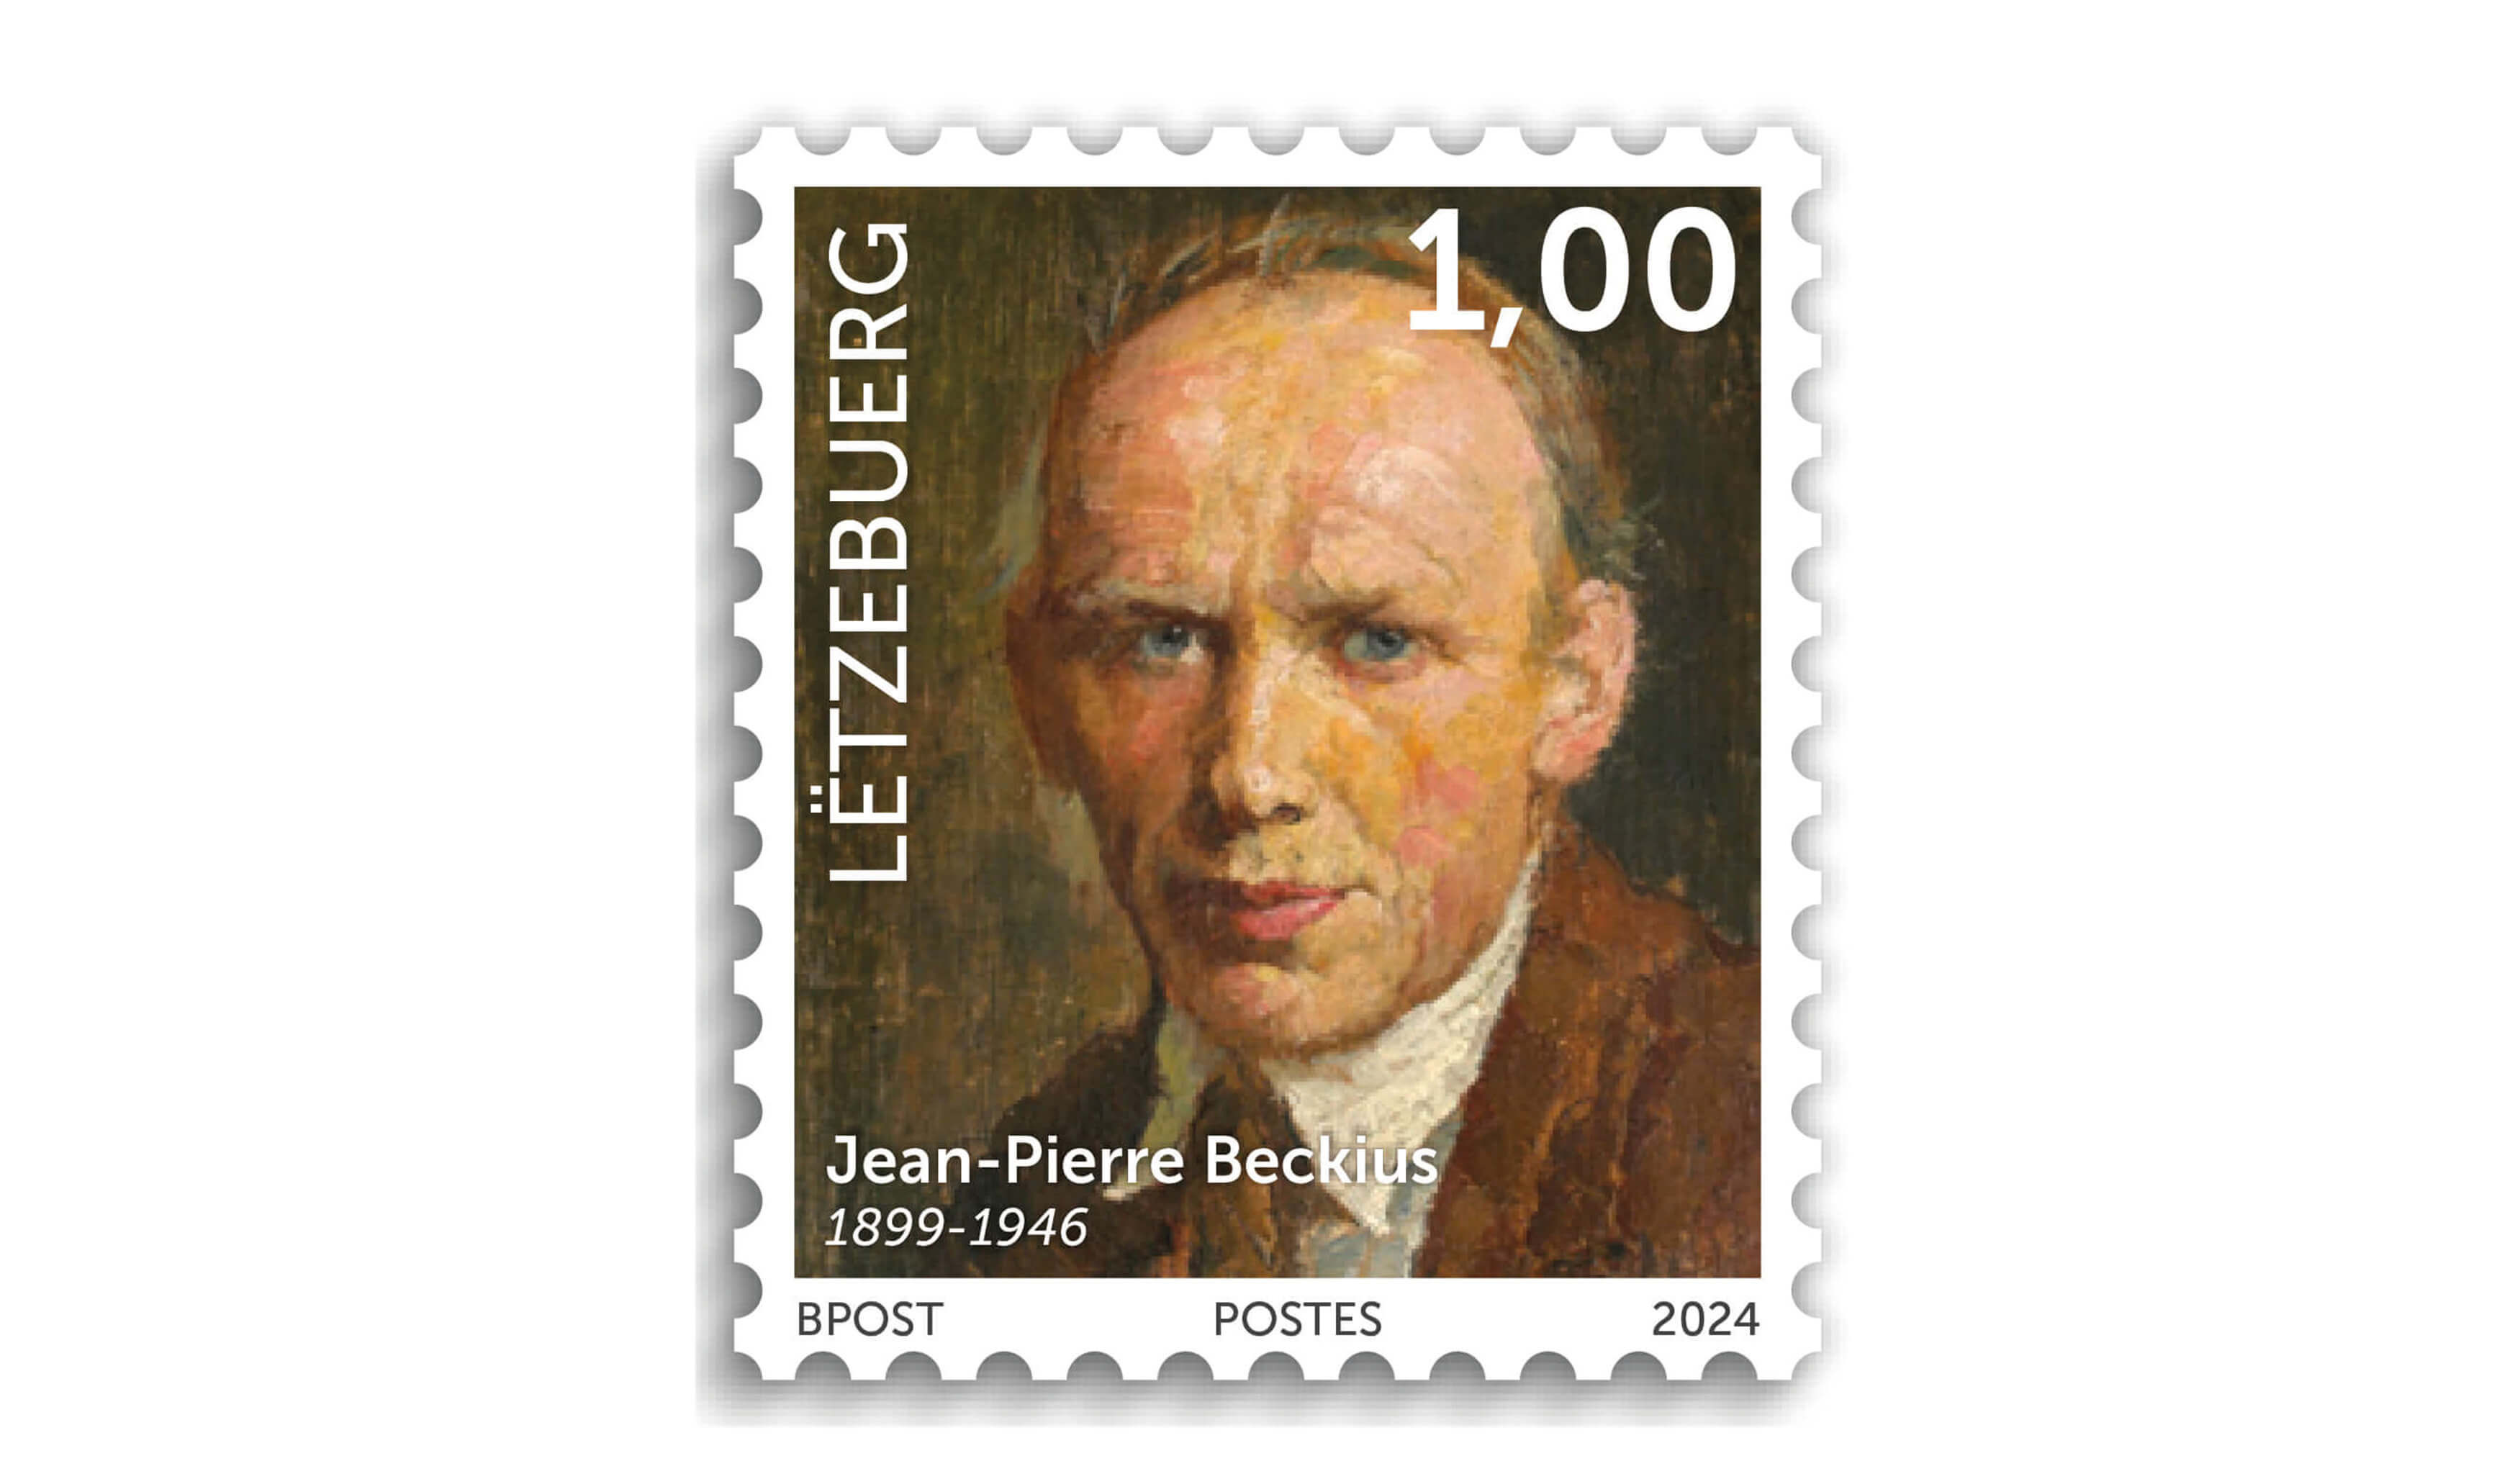 125th anniversary of Jean-Pierre Beckius